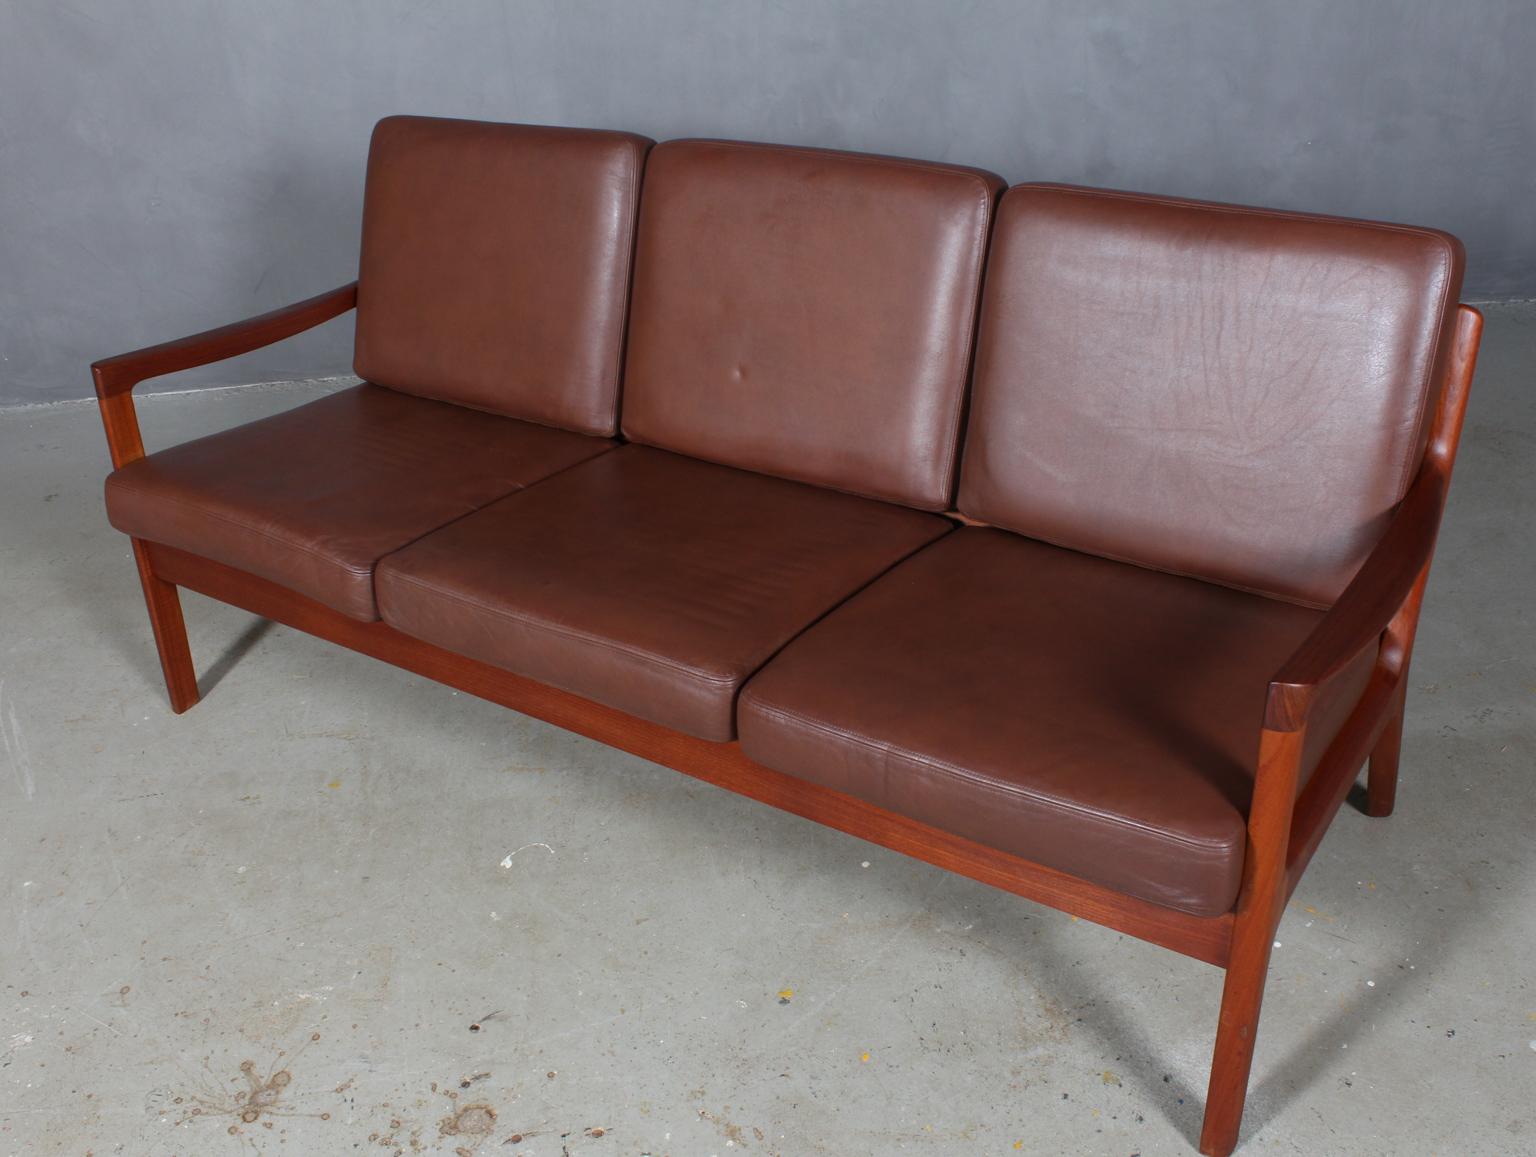 Ole Wanscher three-seat sofa upholstered with light patinated brown leather.

Made of solid teak.

Model senator, made by Cado.